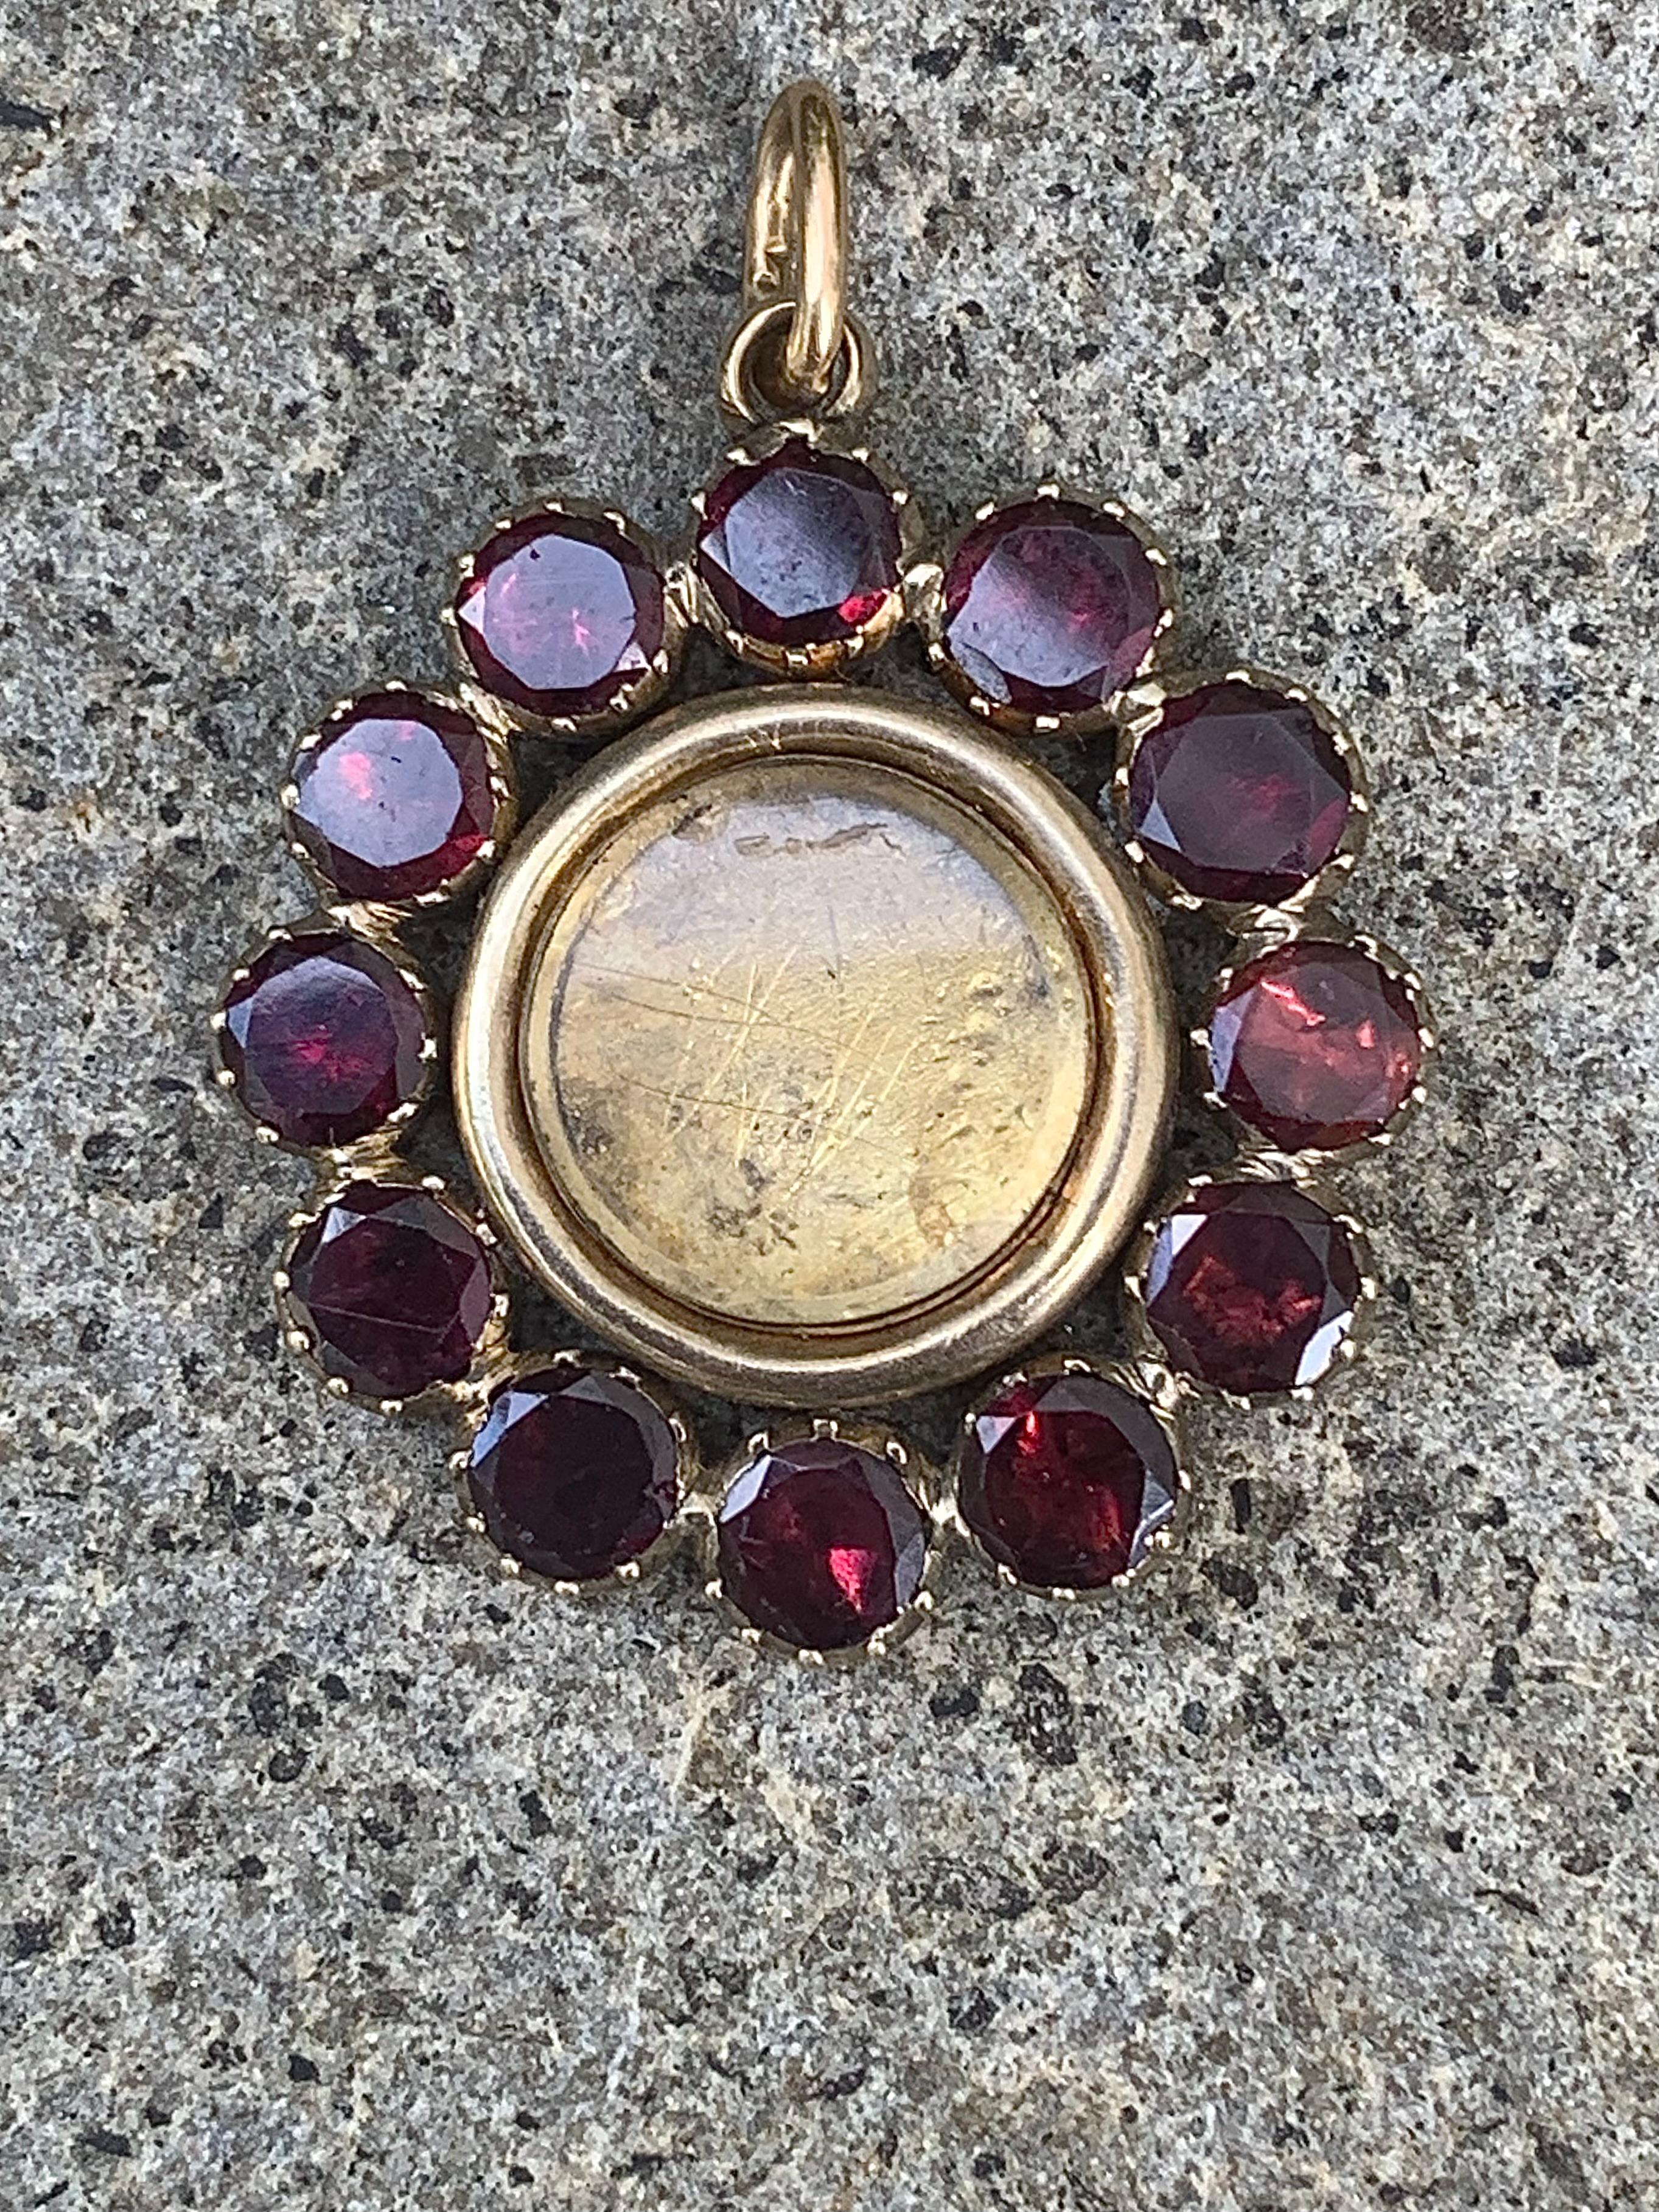 This Georgian pendant  has been handcrafted out of 14 karat yellow and rose gold. It is designed as a stylized flower with twelve flower petals. Each petal is set with a flat cut round garnet. All garnets are in closed settings. The center of the